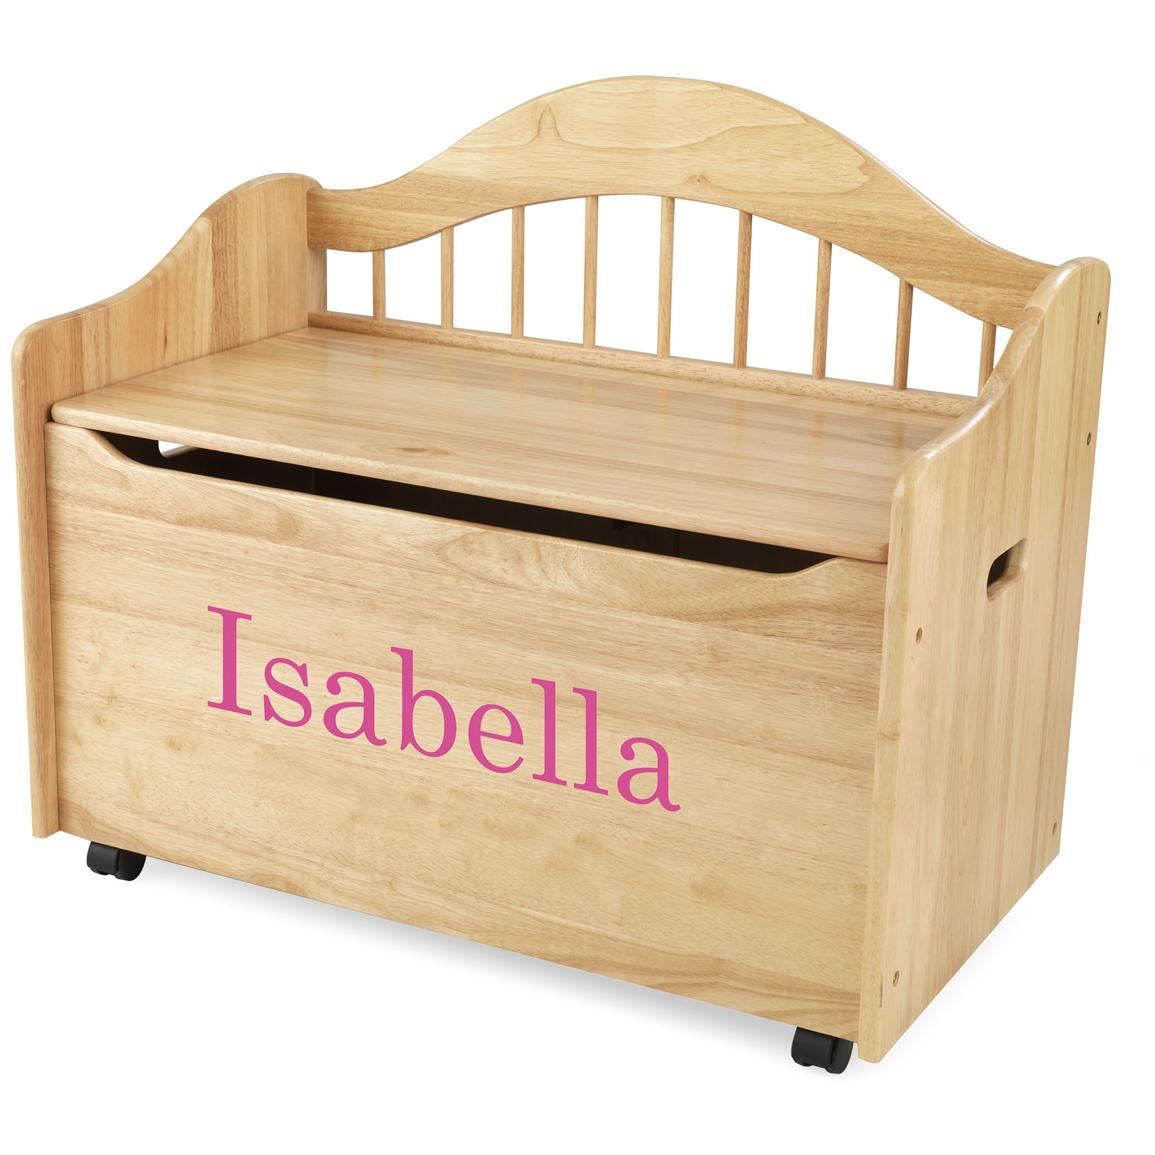 girl toy boxes personalized